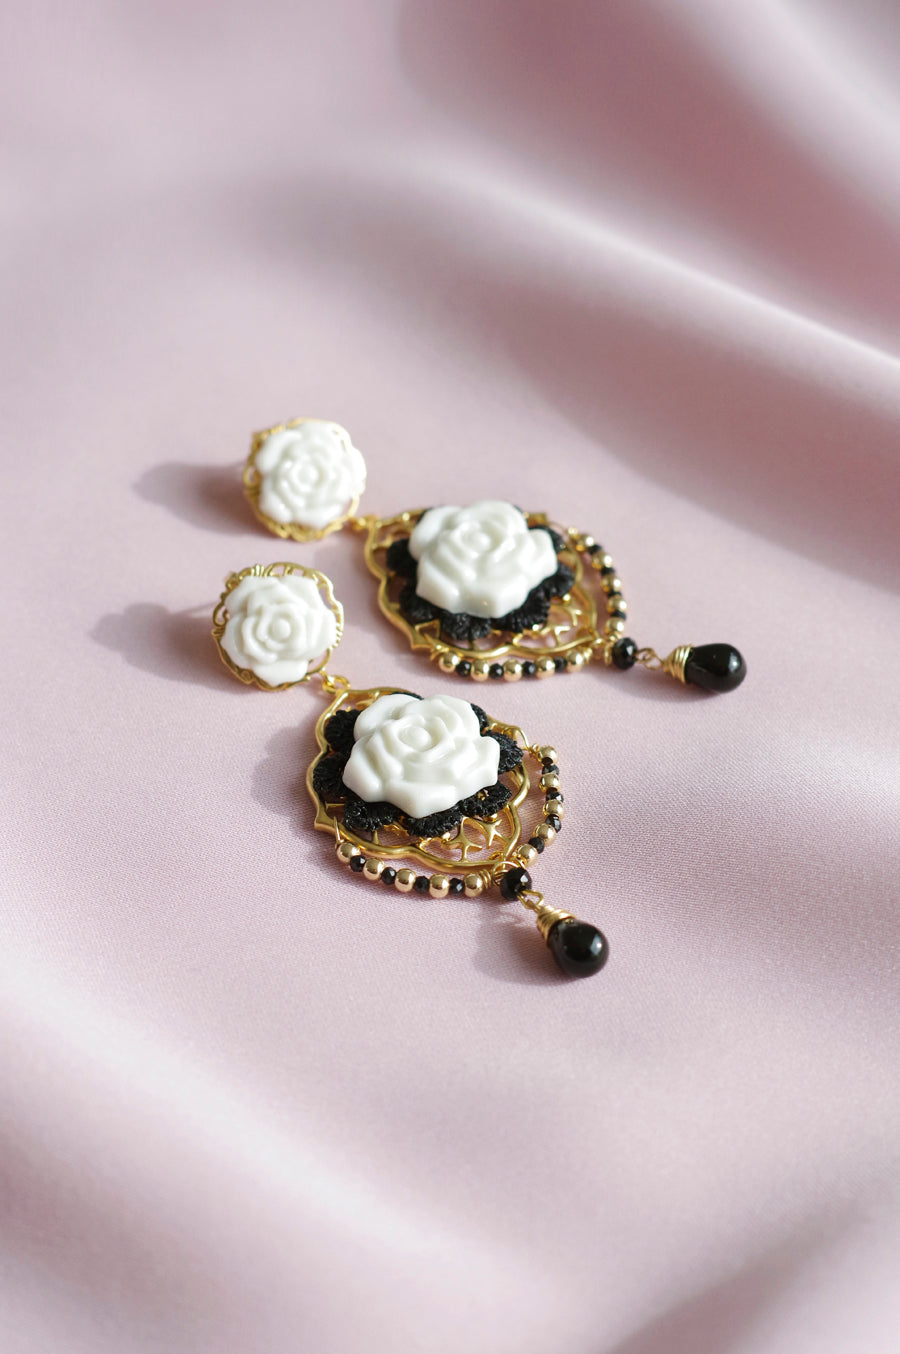 Classic Baroque Porcelain Rose Statement Earrings